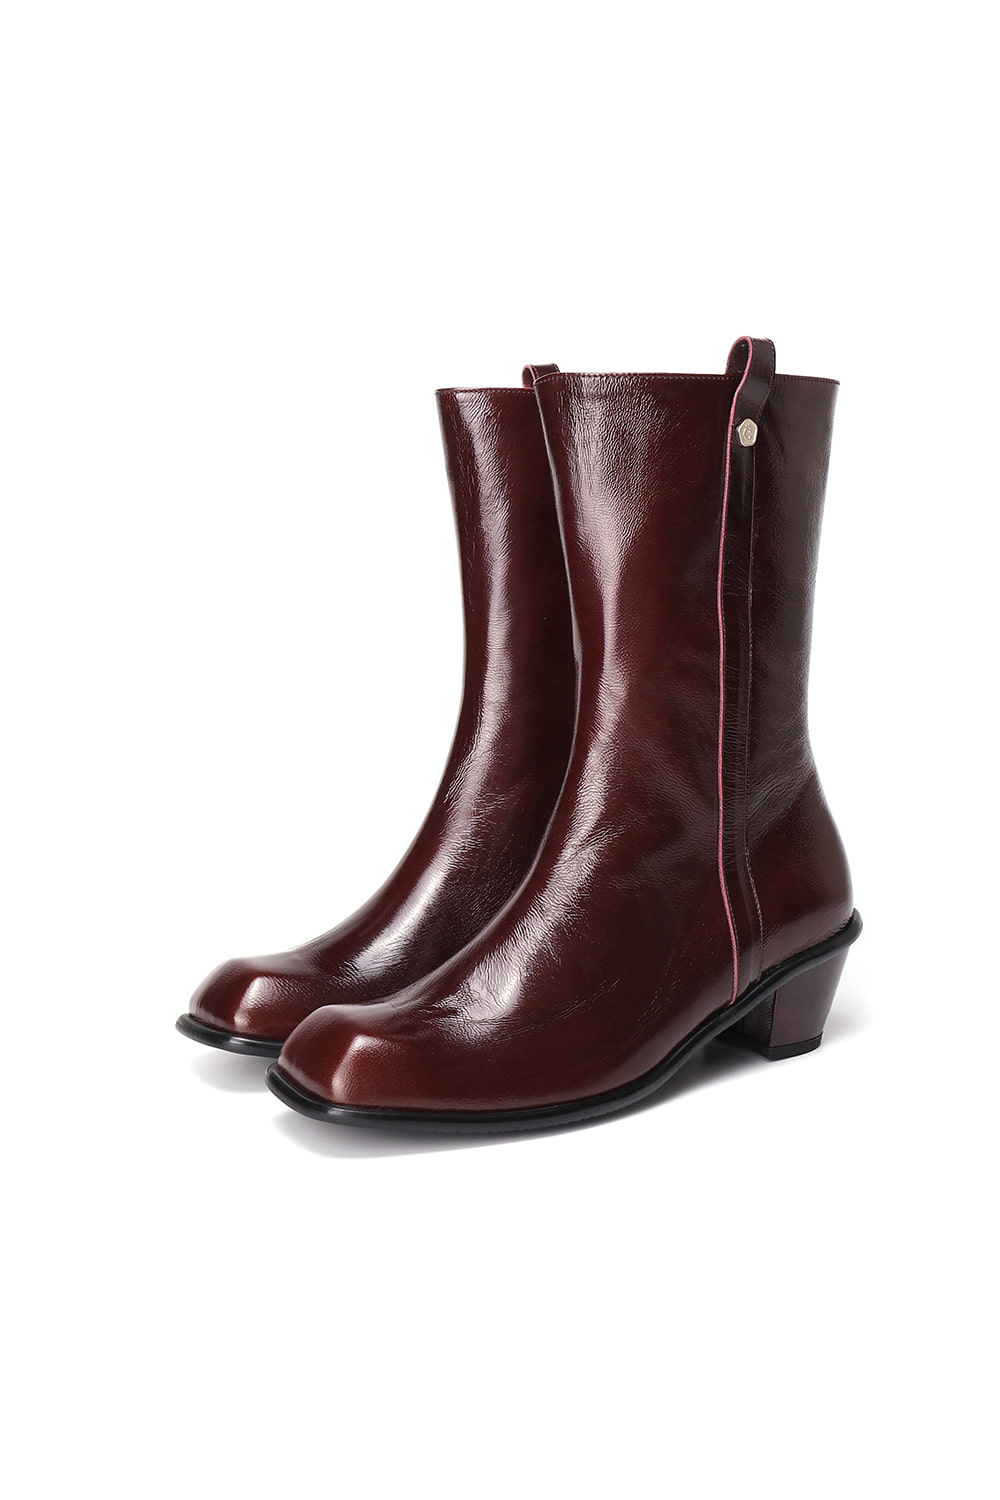 BRYN MIDDLE BOOTS [CHERRY BROWN]